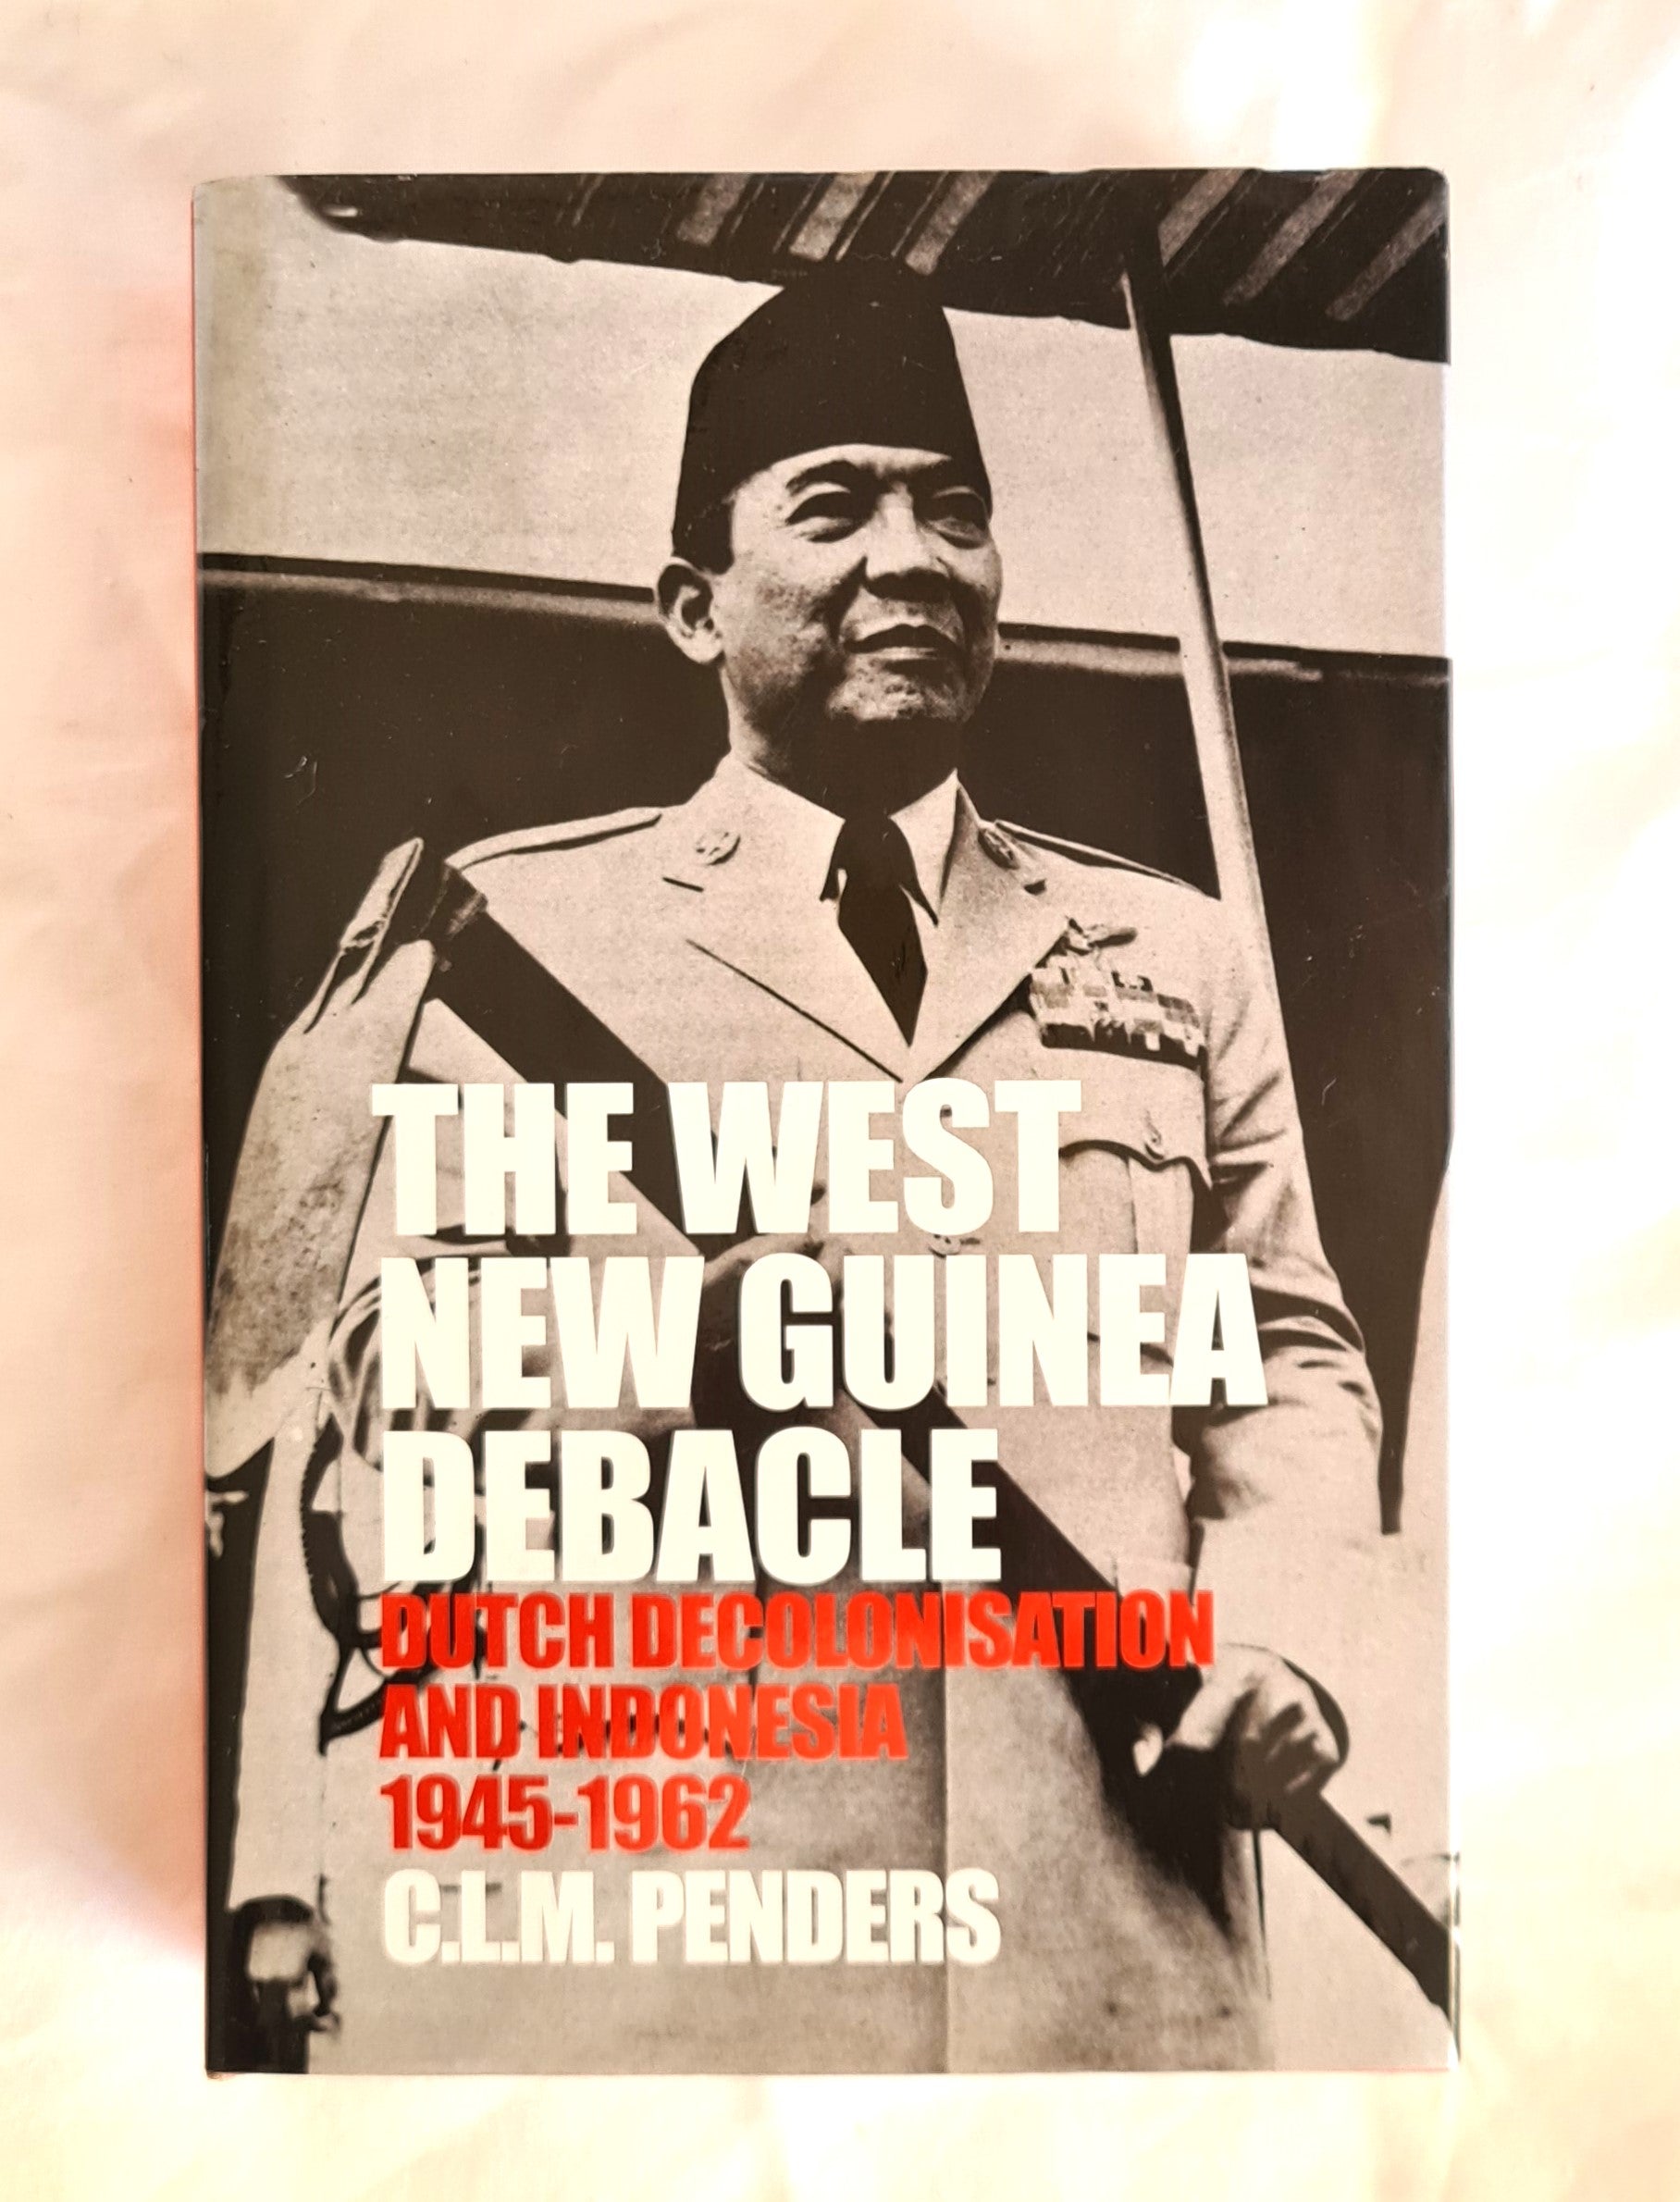 The West New Guinea Debacle  Dutch Decolonisation and Indonesia 1945-1962  by C. L. M. Penders